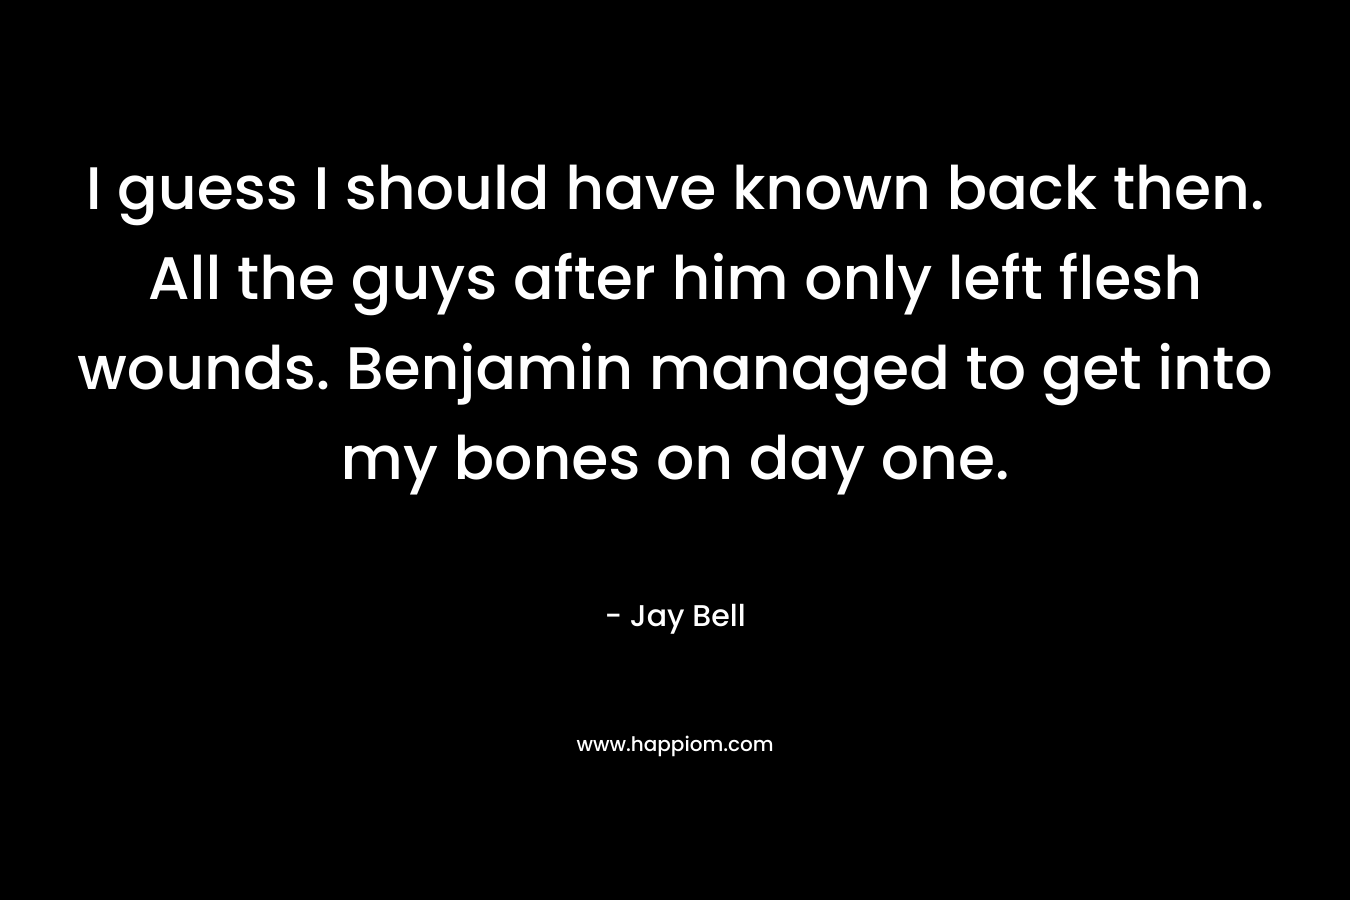 I guess I should have known back then. All the guys after him only left flesh wounds. Benjamin managed to get into my bones on day one. – Jay Bell